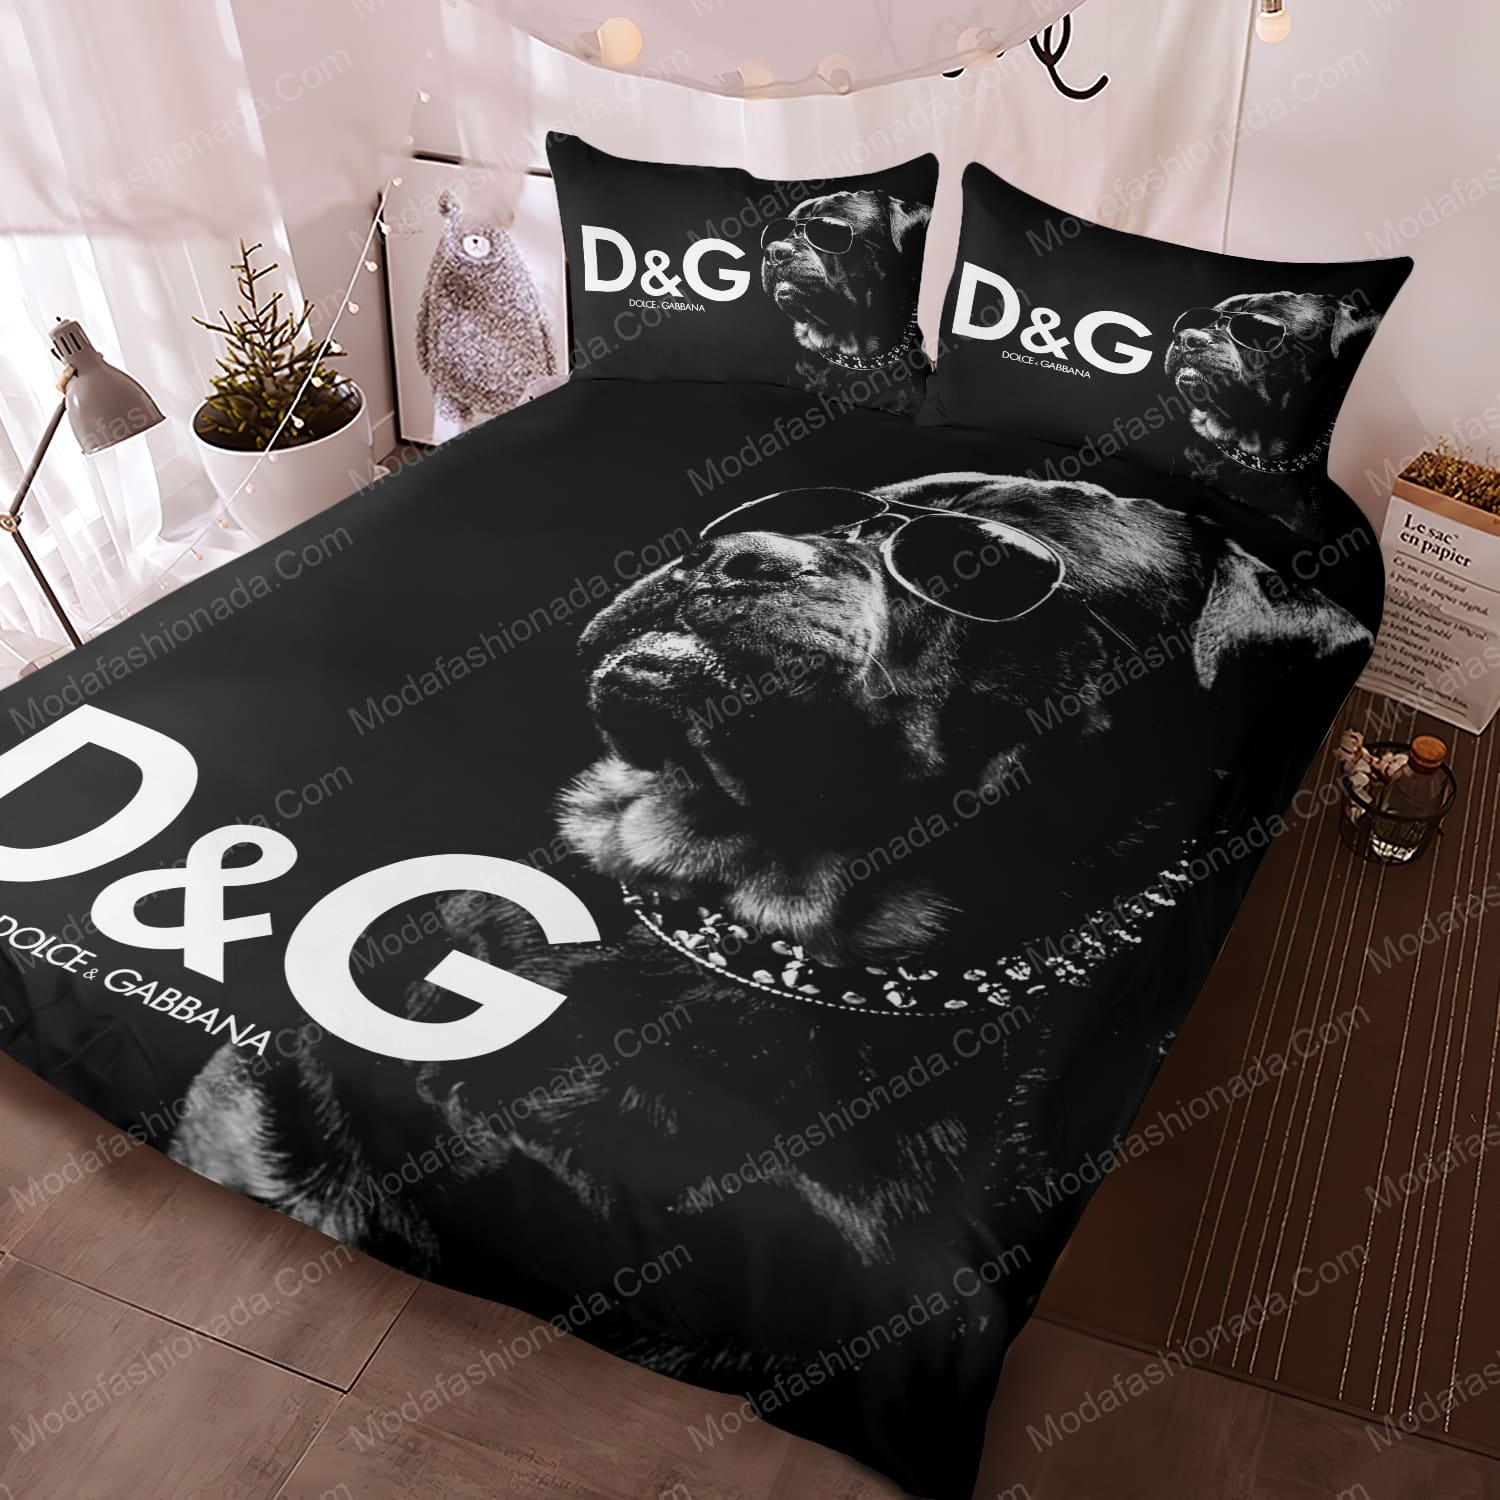 Buy Rotweller Dolce & Gabbana Bedding Sets Bed Sets With Twin, Full ...